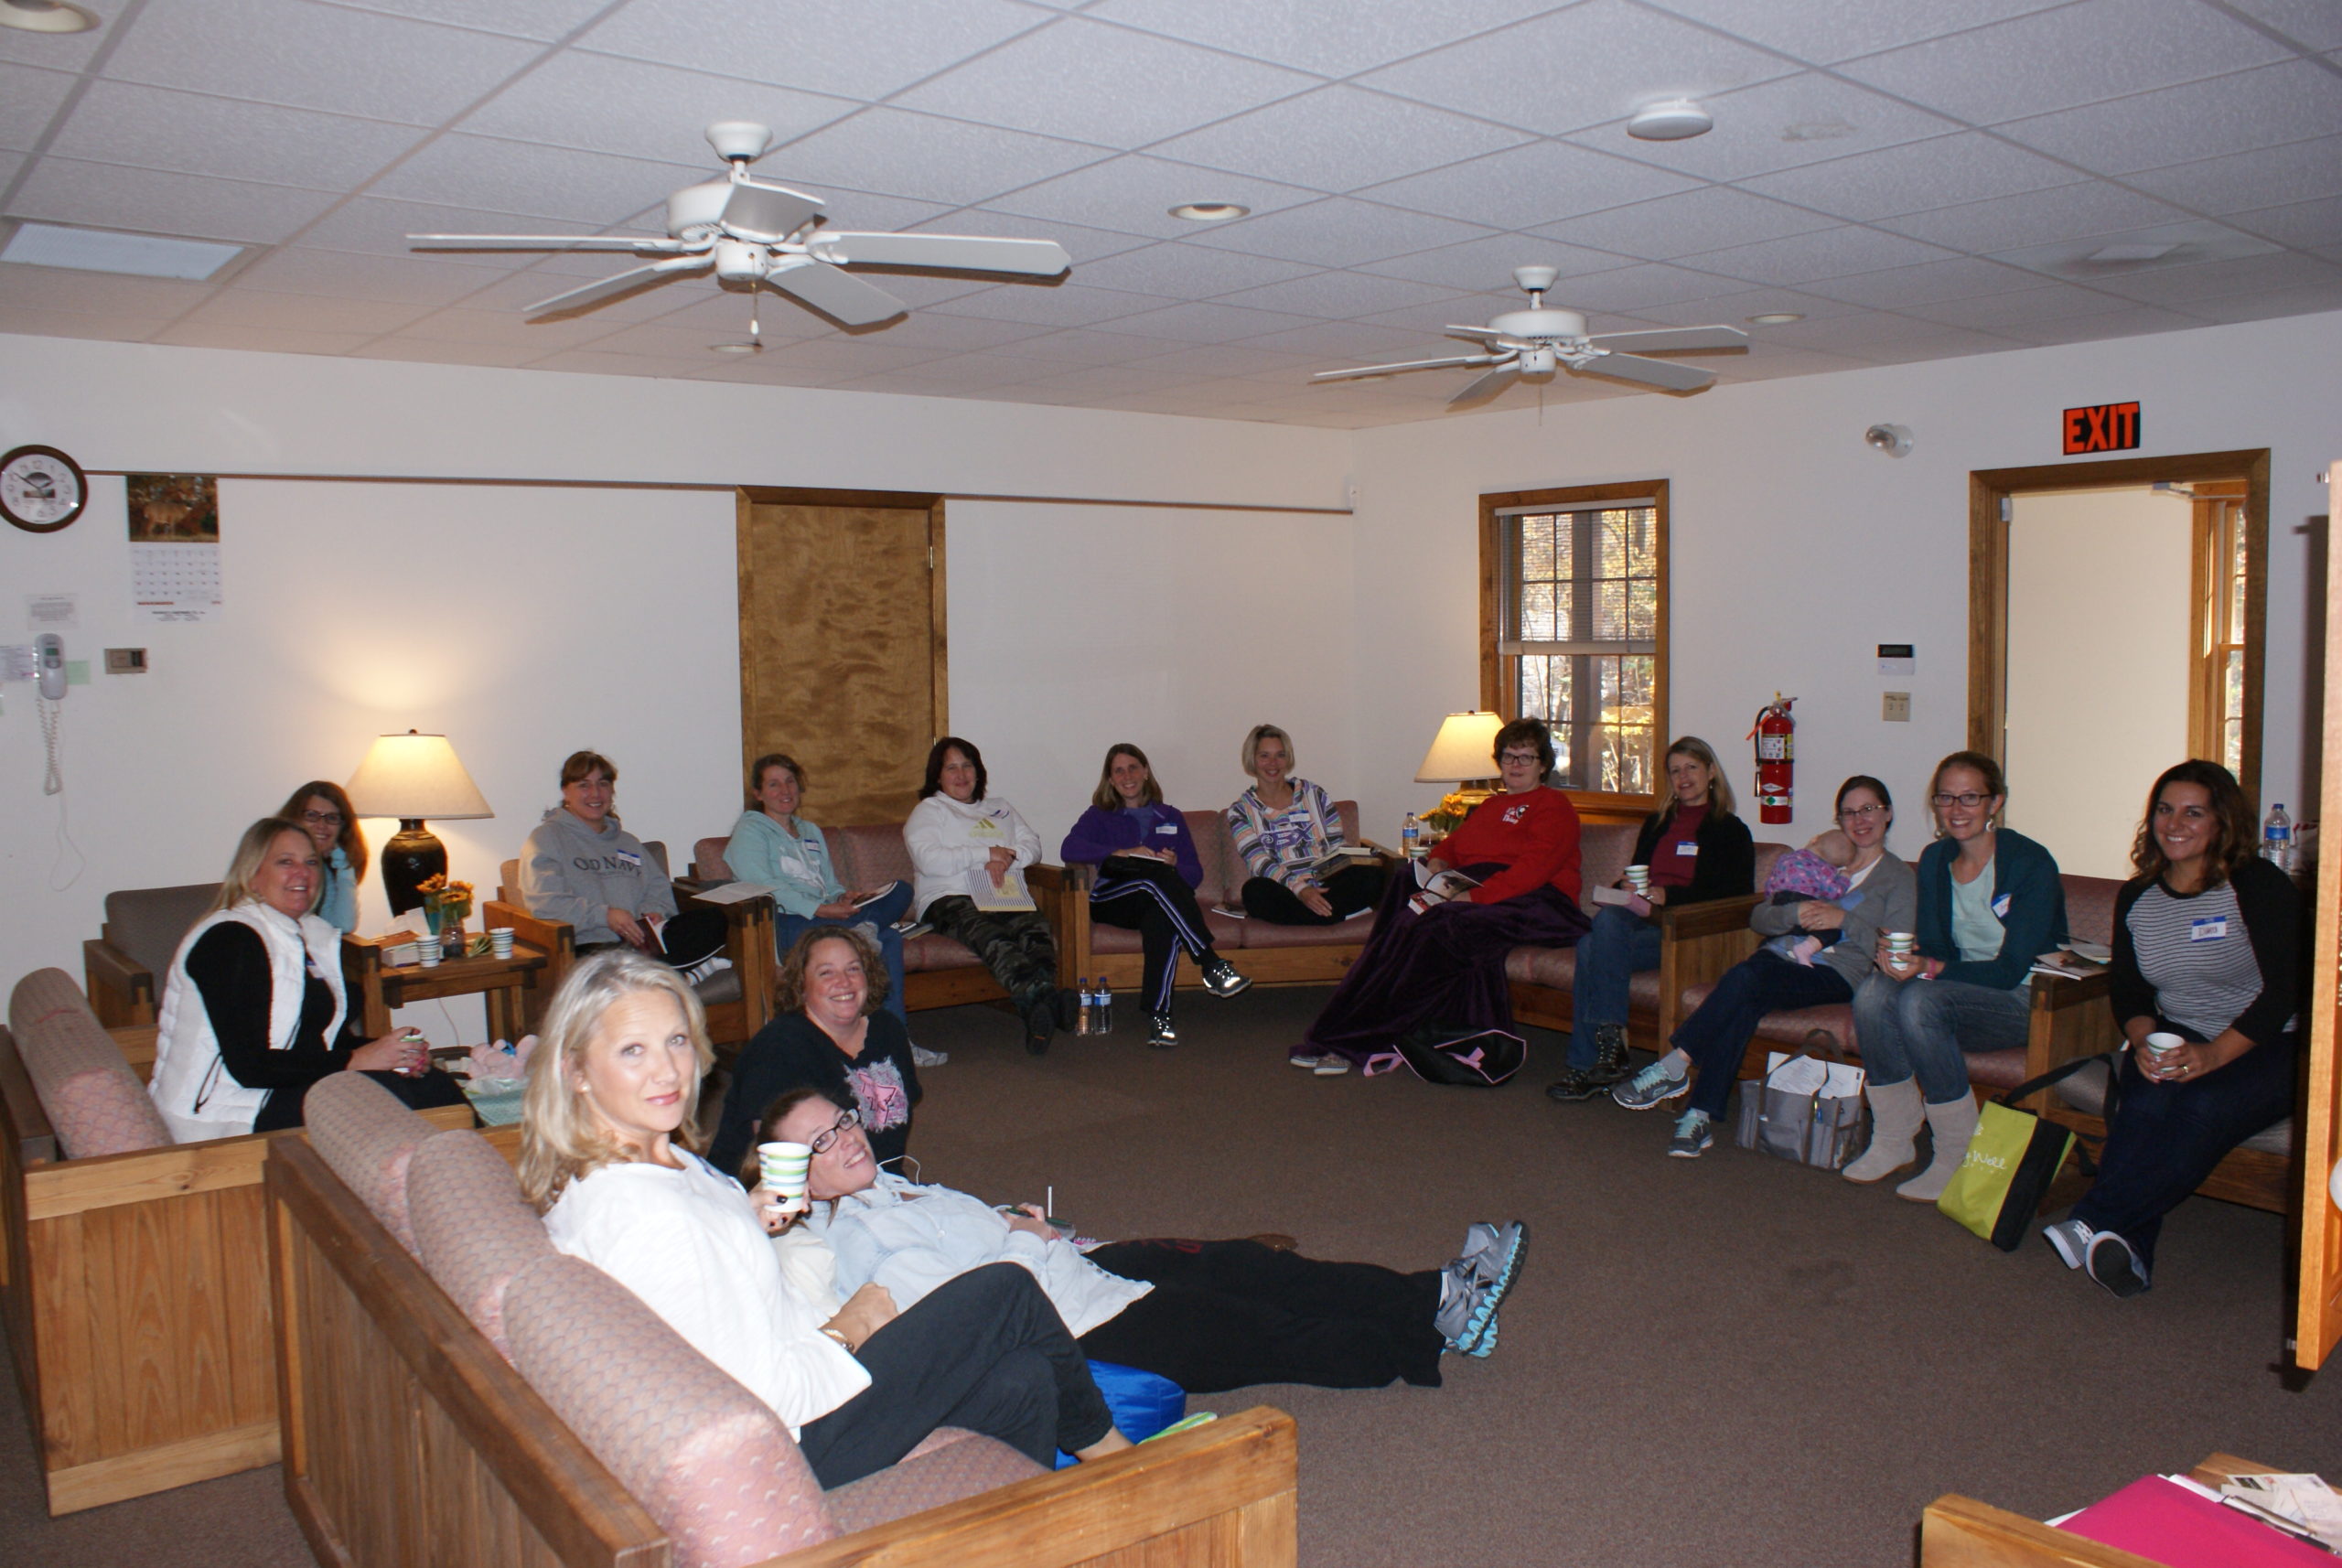 2016-11 Inspired Sisters Women's Ministry of Zions Church Annual Women's Retreat Weekend